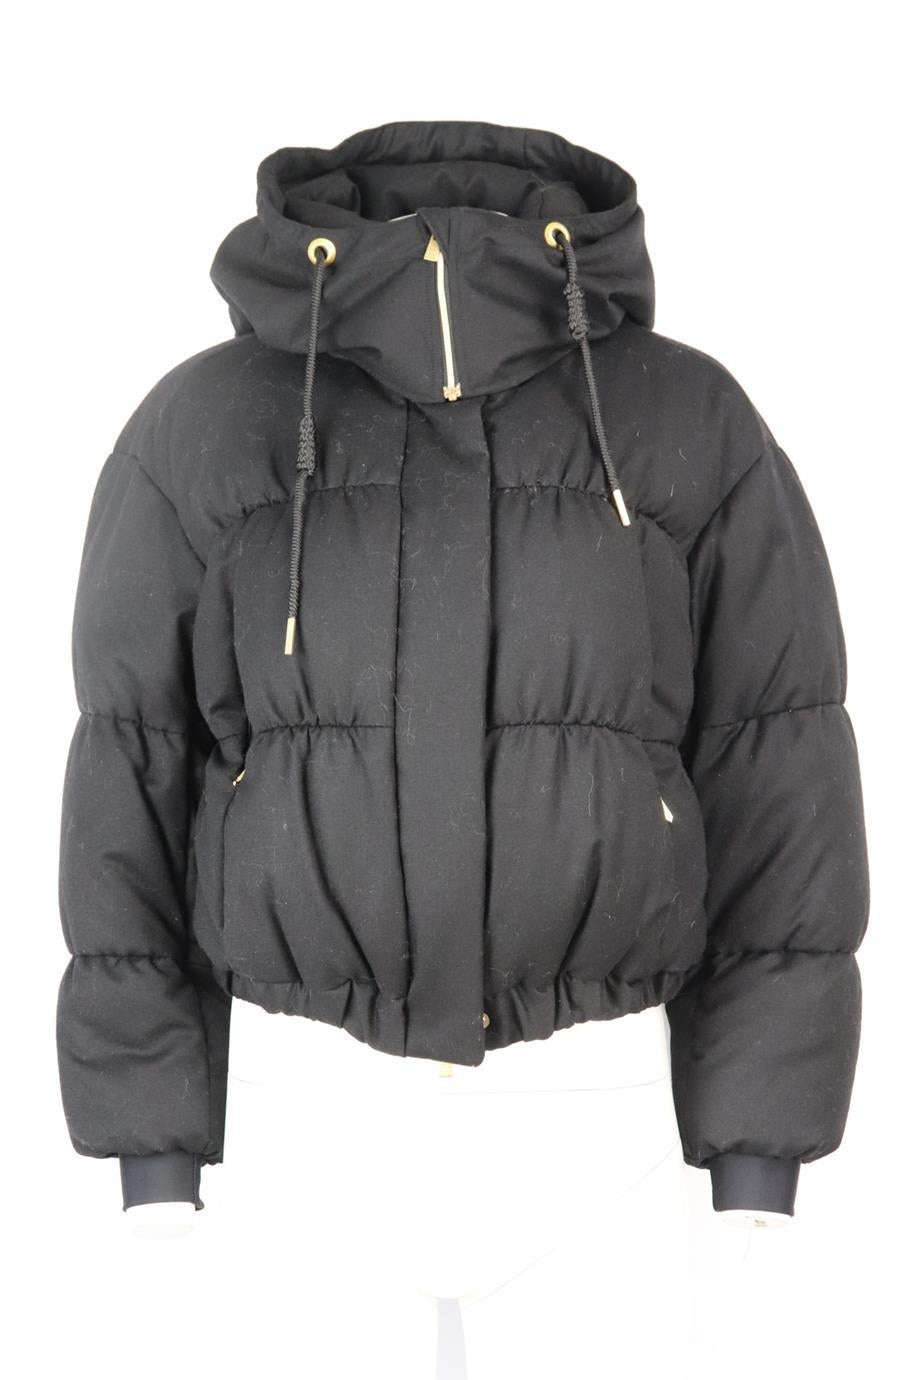 Tatras hooded quilted wool down jacket. Black. Long sleeve, crewneck. Zip fastening at front. 100% Wool; lining: 100% nylon; padding: 90% down, 10% feathers; cuffs: 79% polyester, 21% polyuthane. Size: UK 10 (US 6, FR 38, IT 42). Shoulder to